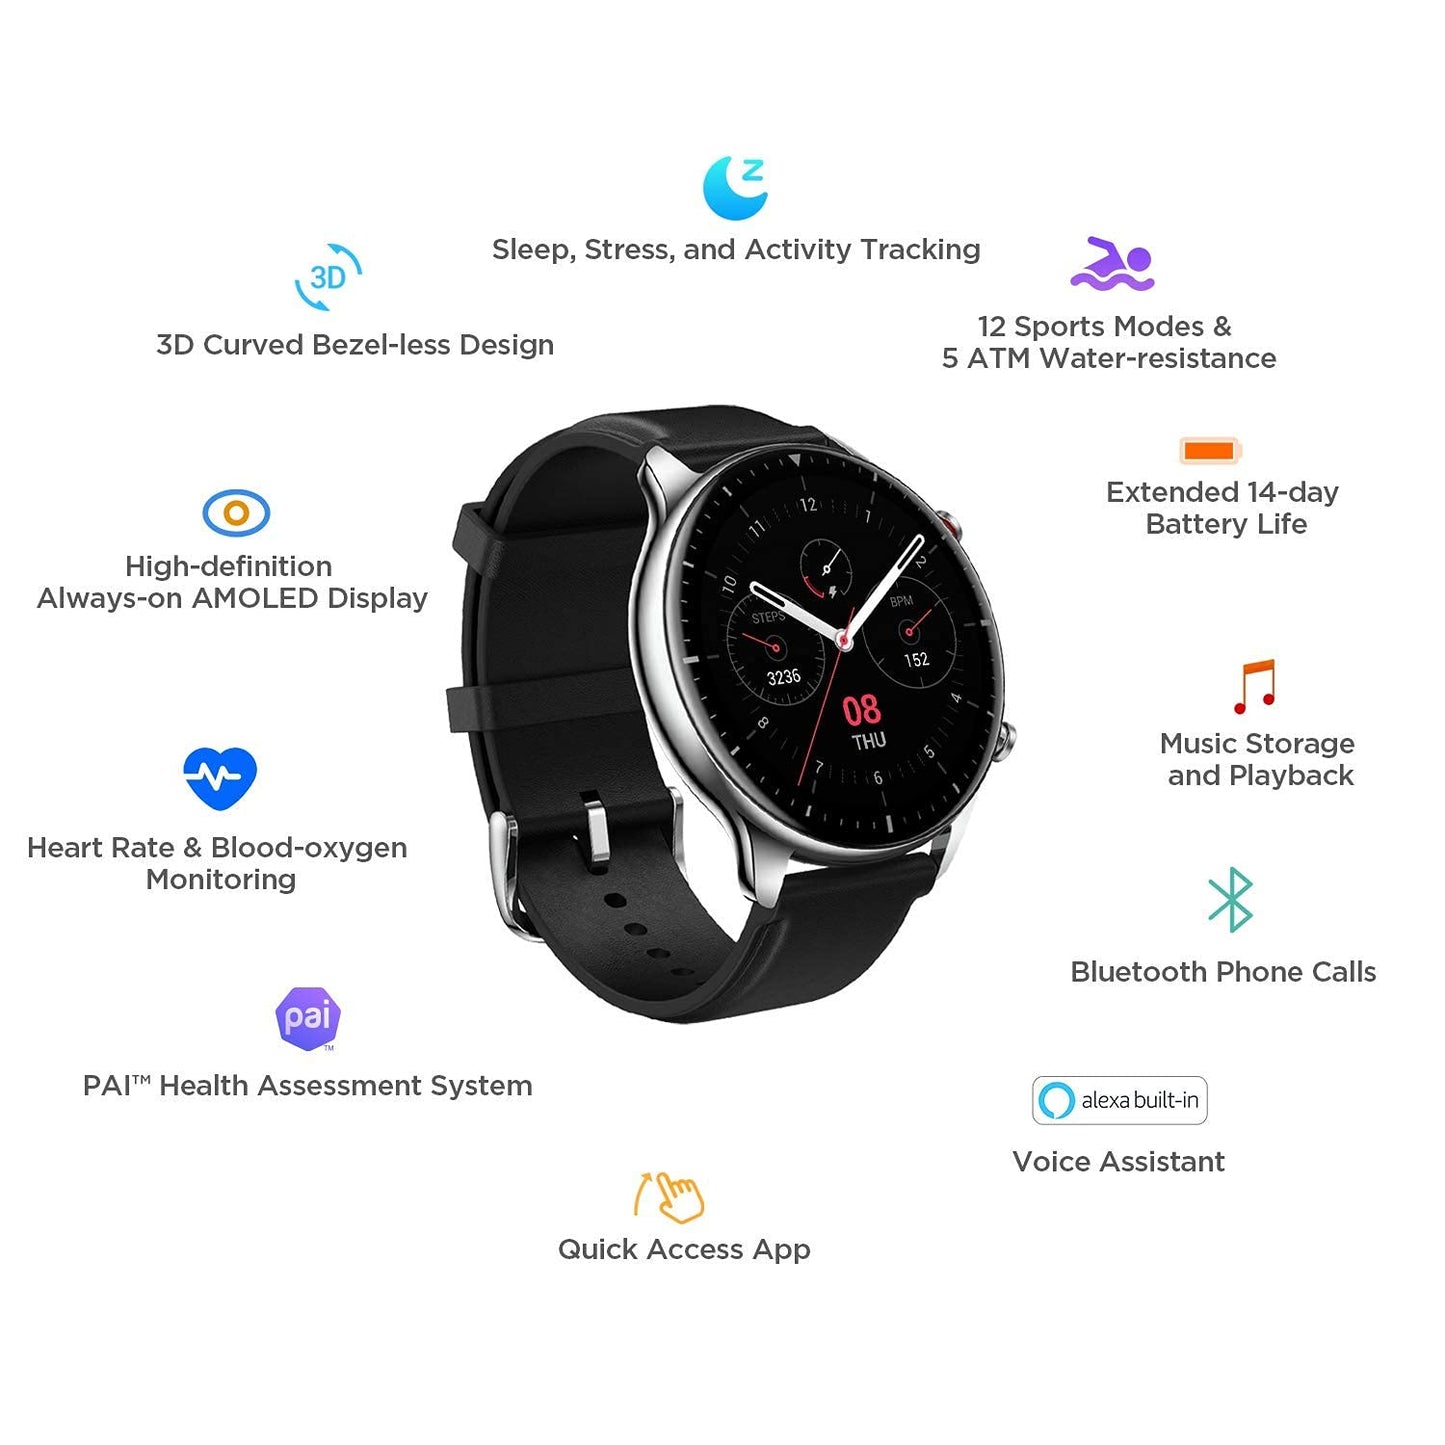 (Refurbished) Amazfit GTR 2 Smart Watch, 1.39" AMOLED Display, SpO2 & Stress Monitor, Built-in Alexa, Built-in GPS, Bluetooth Phone Calls, 3GB Music Storage, 14-Day Battery Life, 90 Sports Modes (Classic Edition)